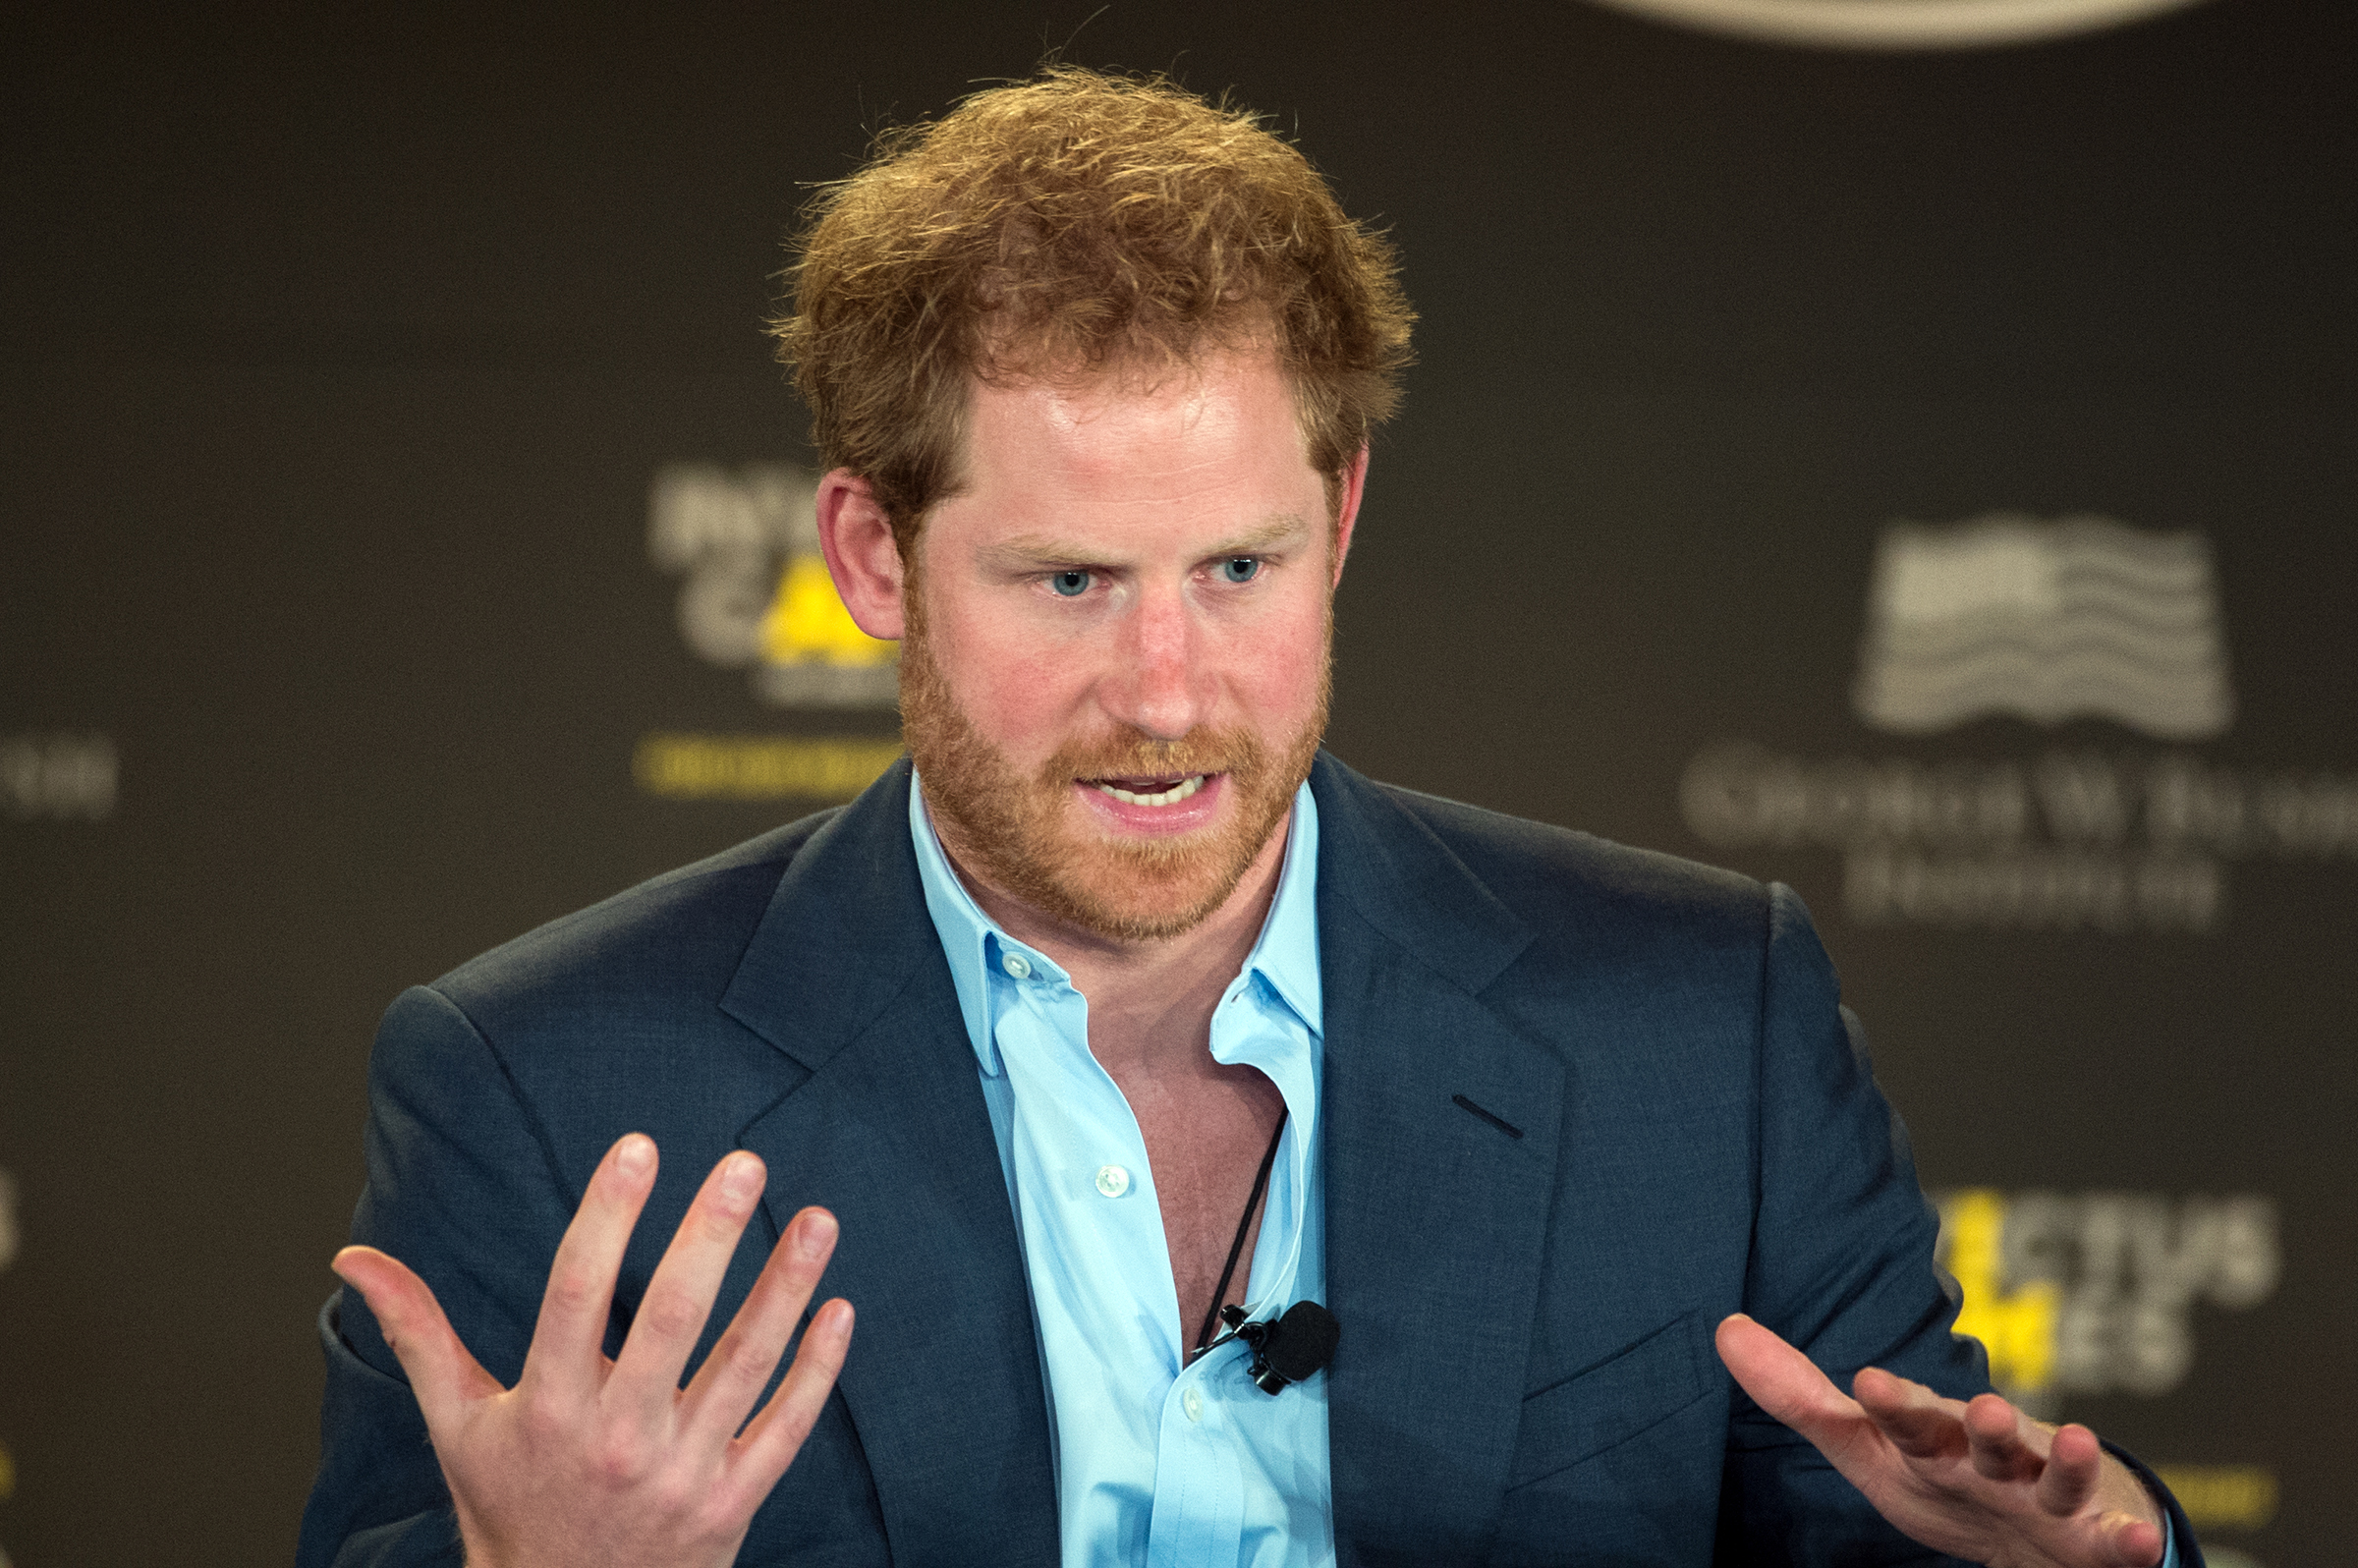 UK's Prince Harry seeks right to pay for UK police protection